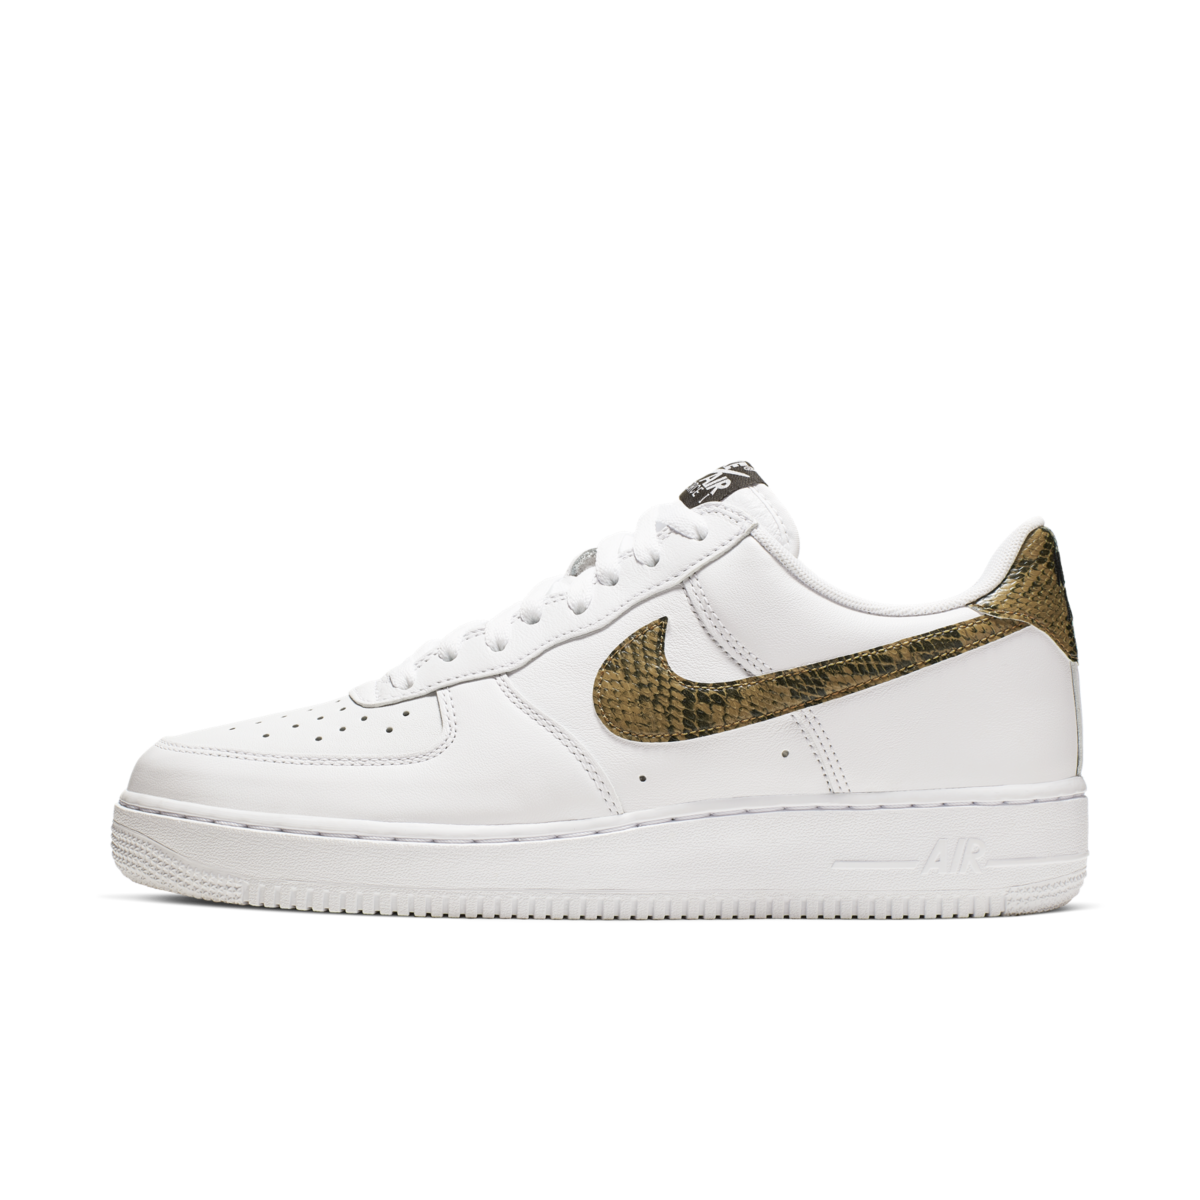 Nike Air Force 1 Low PRM QS 'Snake' AO1635-100